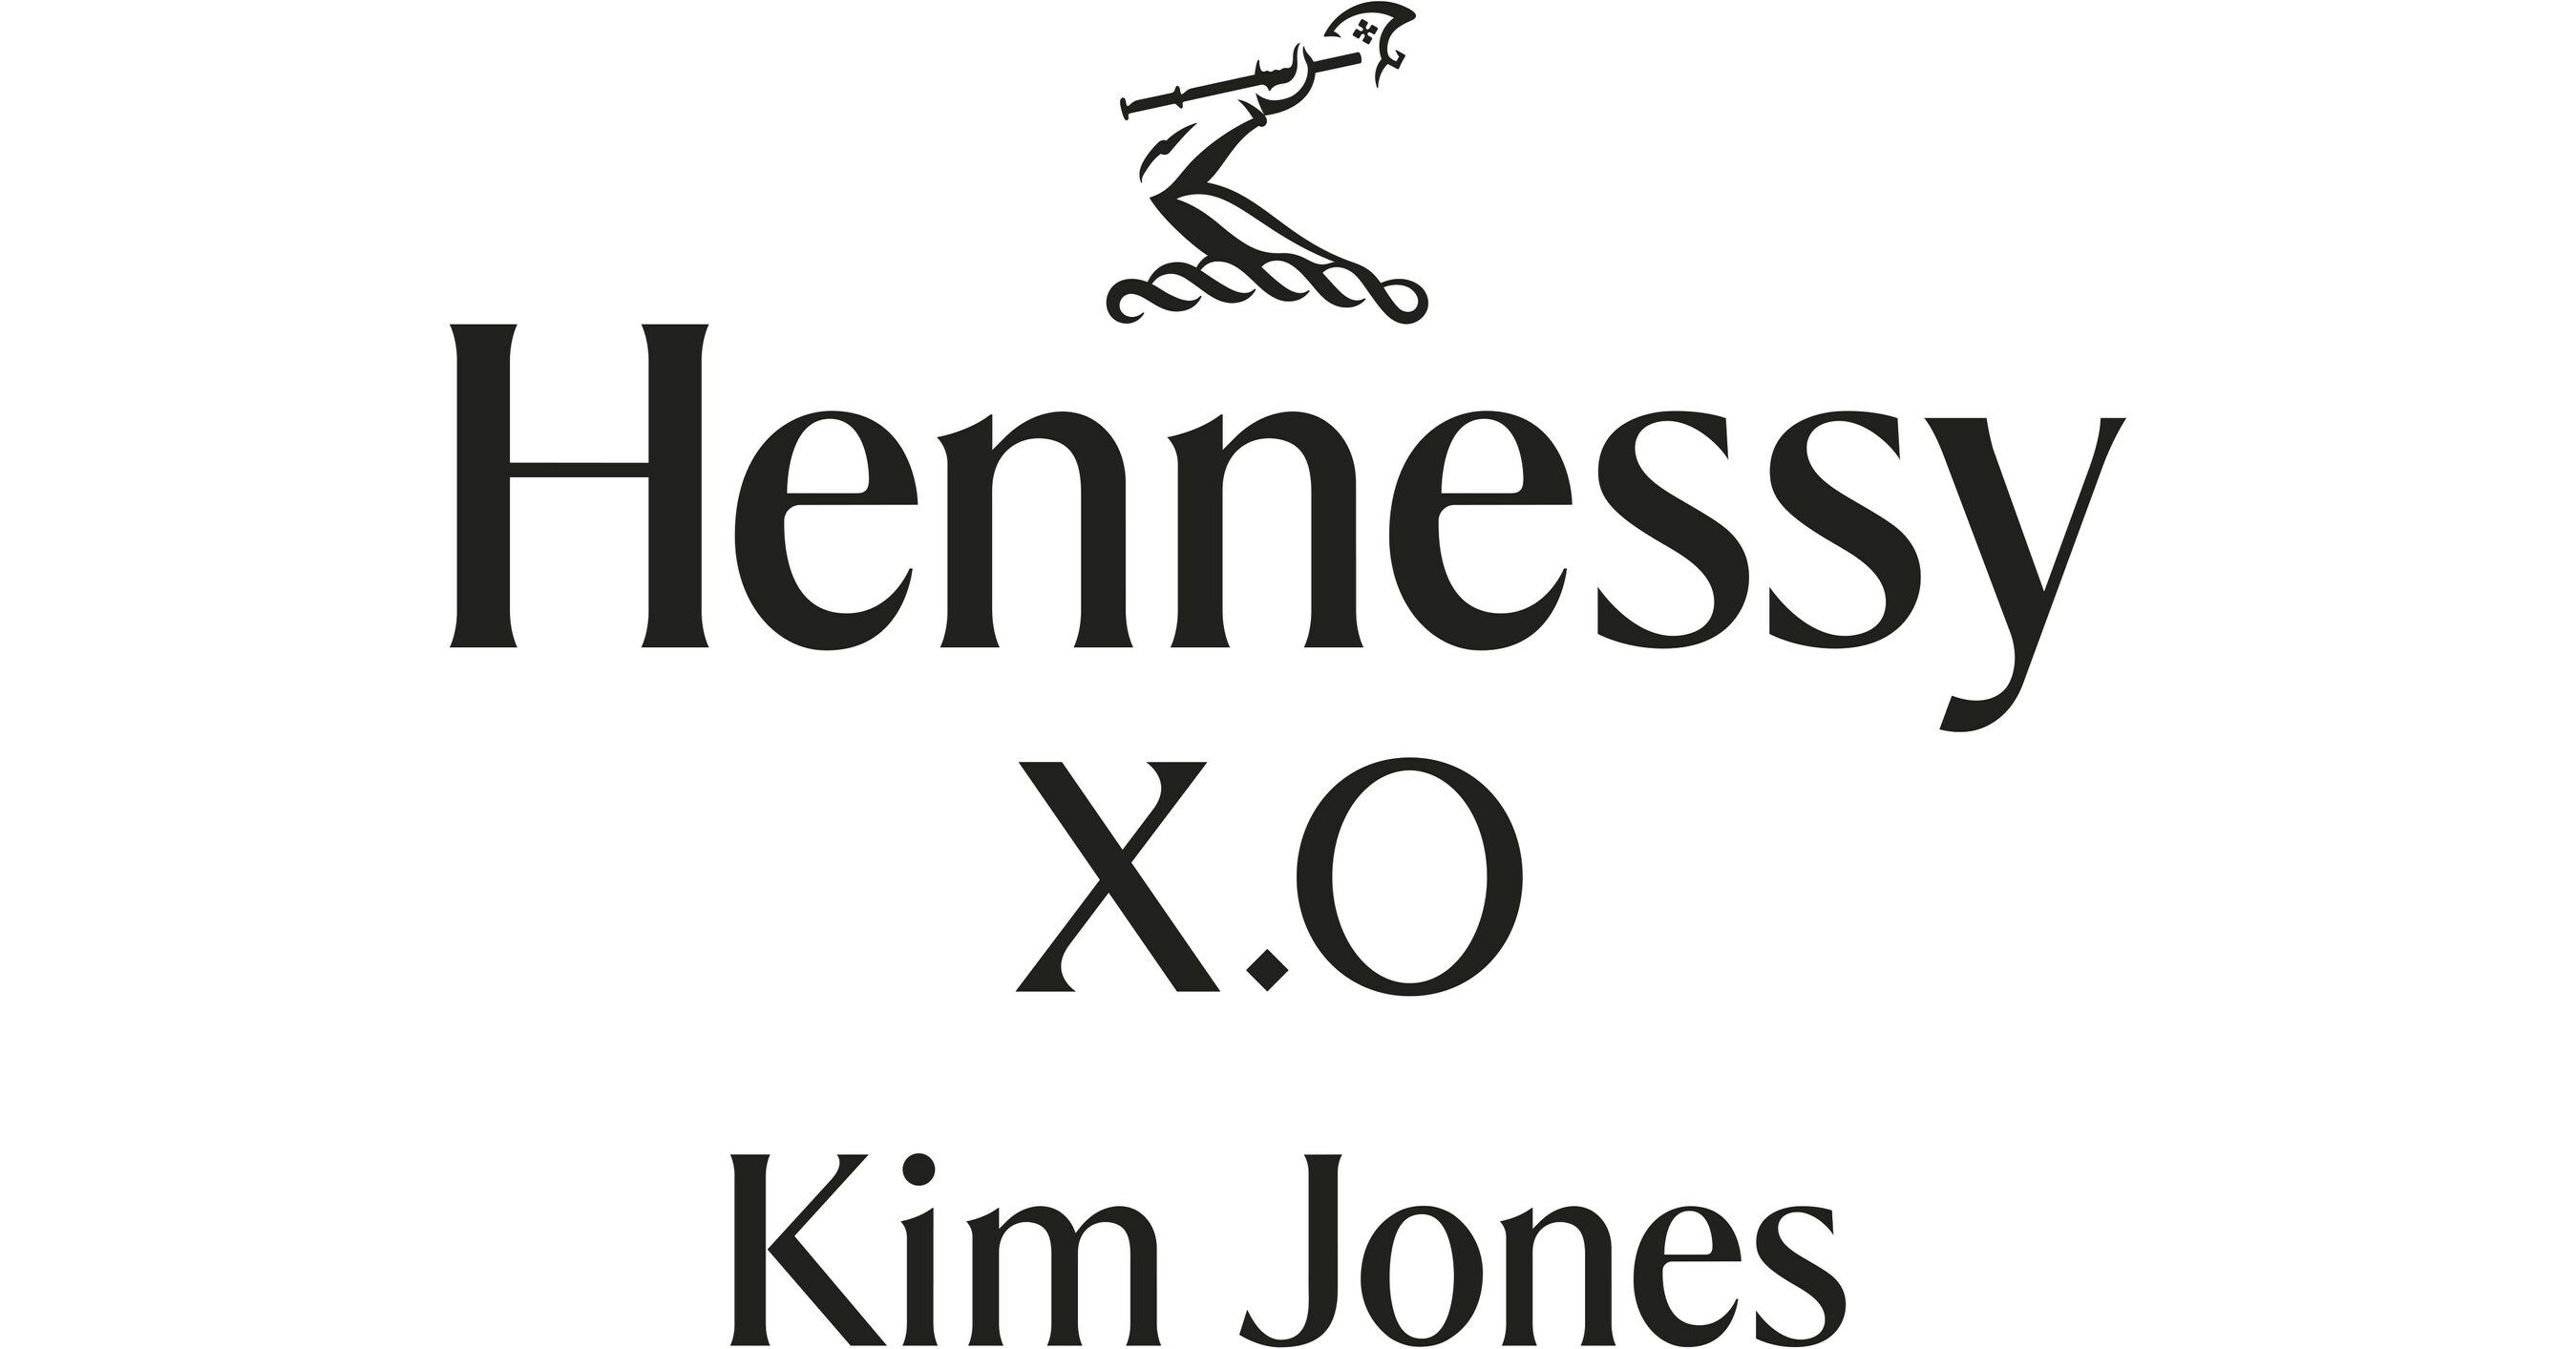 New Hennessy XO x KIM JONES COLLAB 😍 how gorgeoys does this look